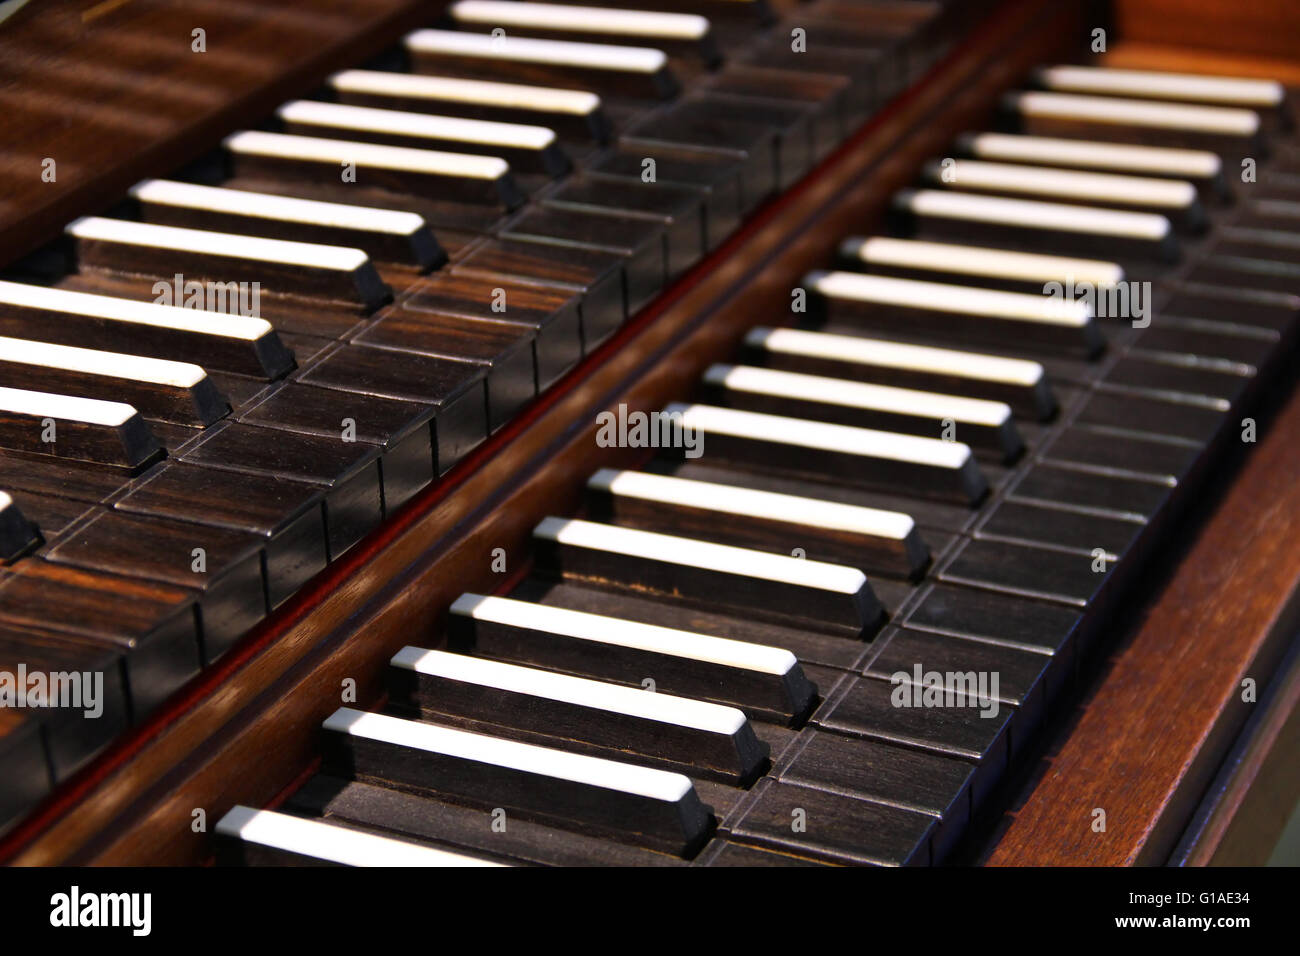 Close-up view of old harpsichord keys Stock Photo